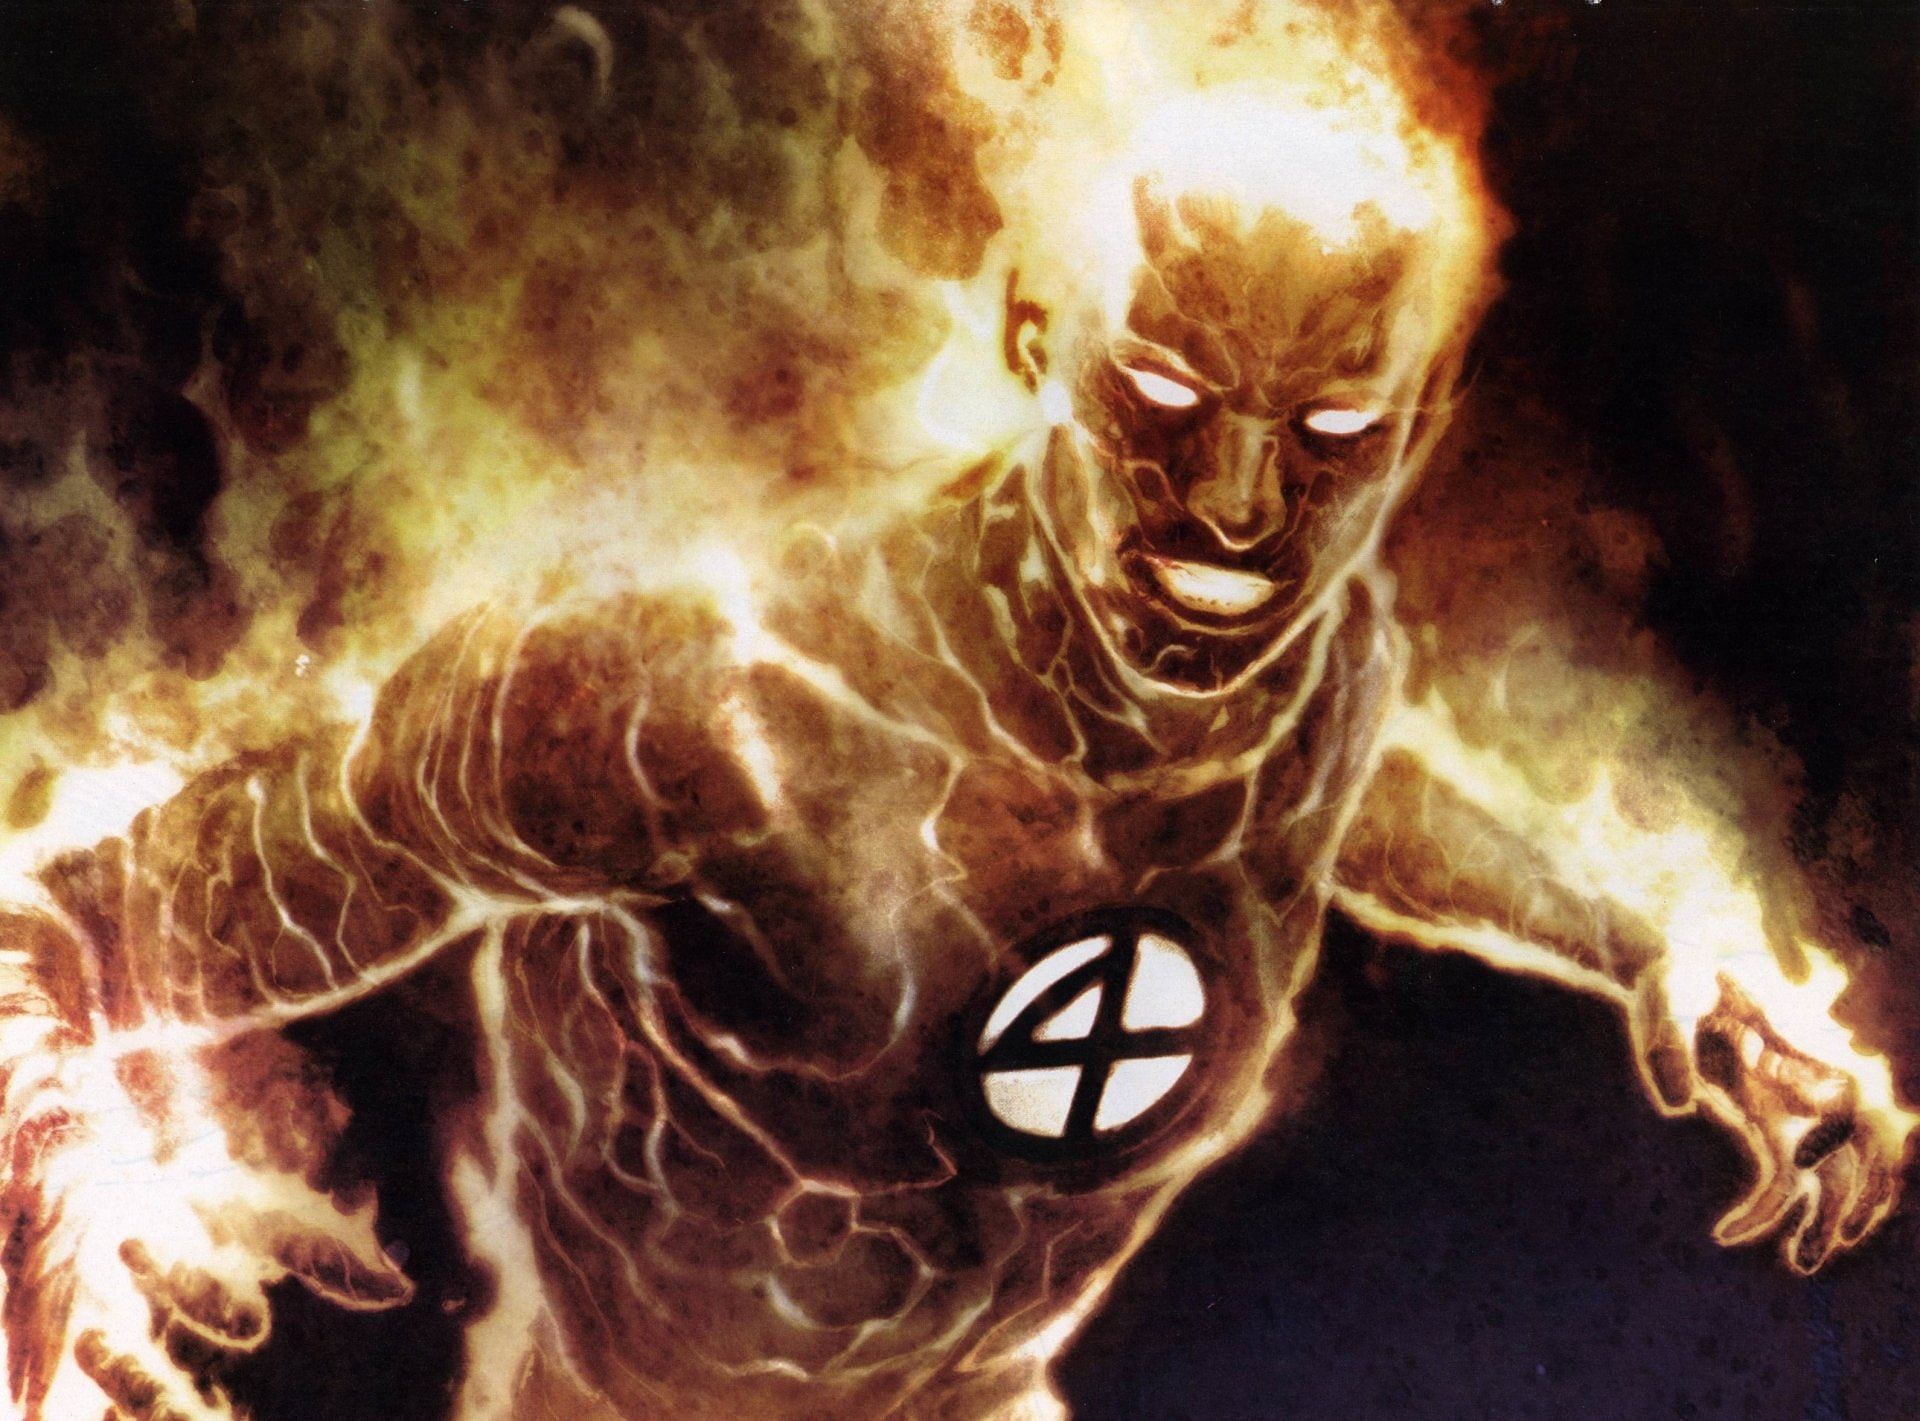 The Human Torch is a hero who has fought for justice and to protect humanity at large. (Image via Marvel)